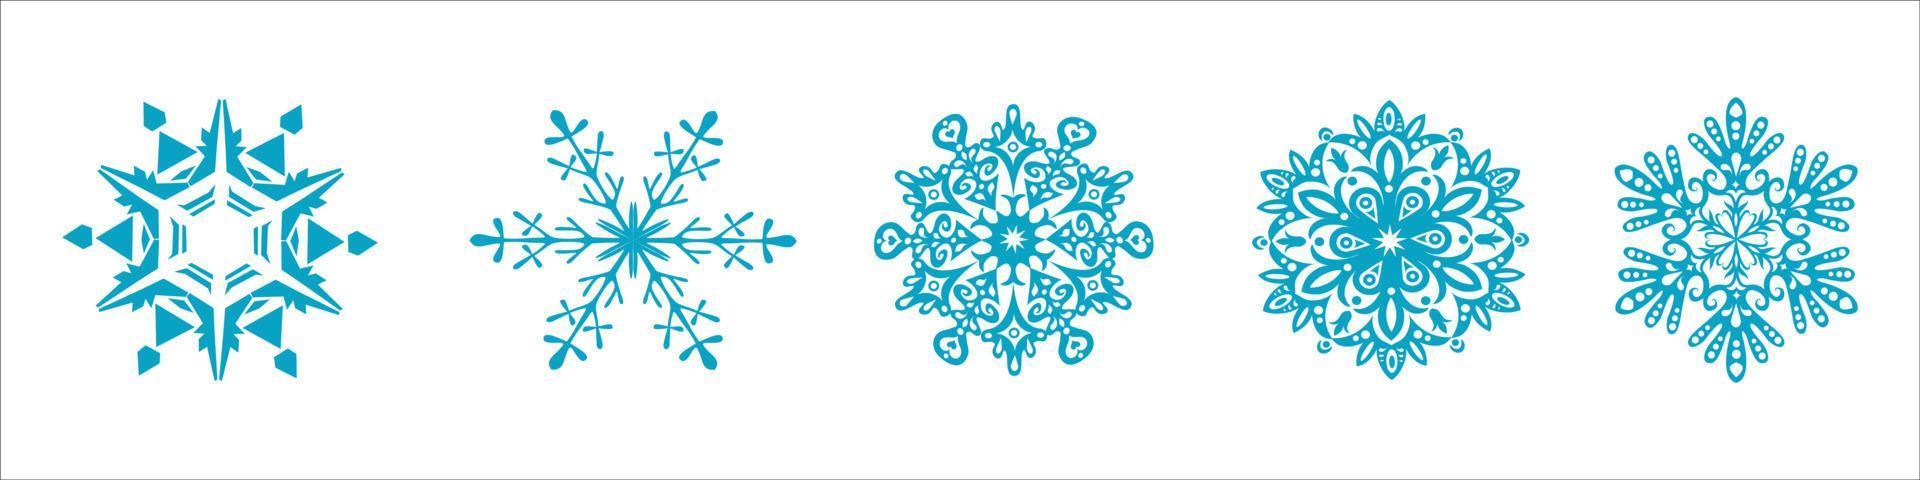 Blue snowflake icons collection isolated on white background. vector